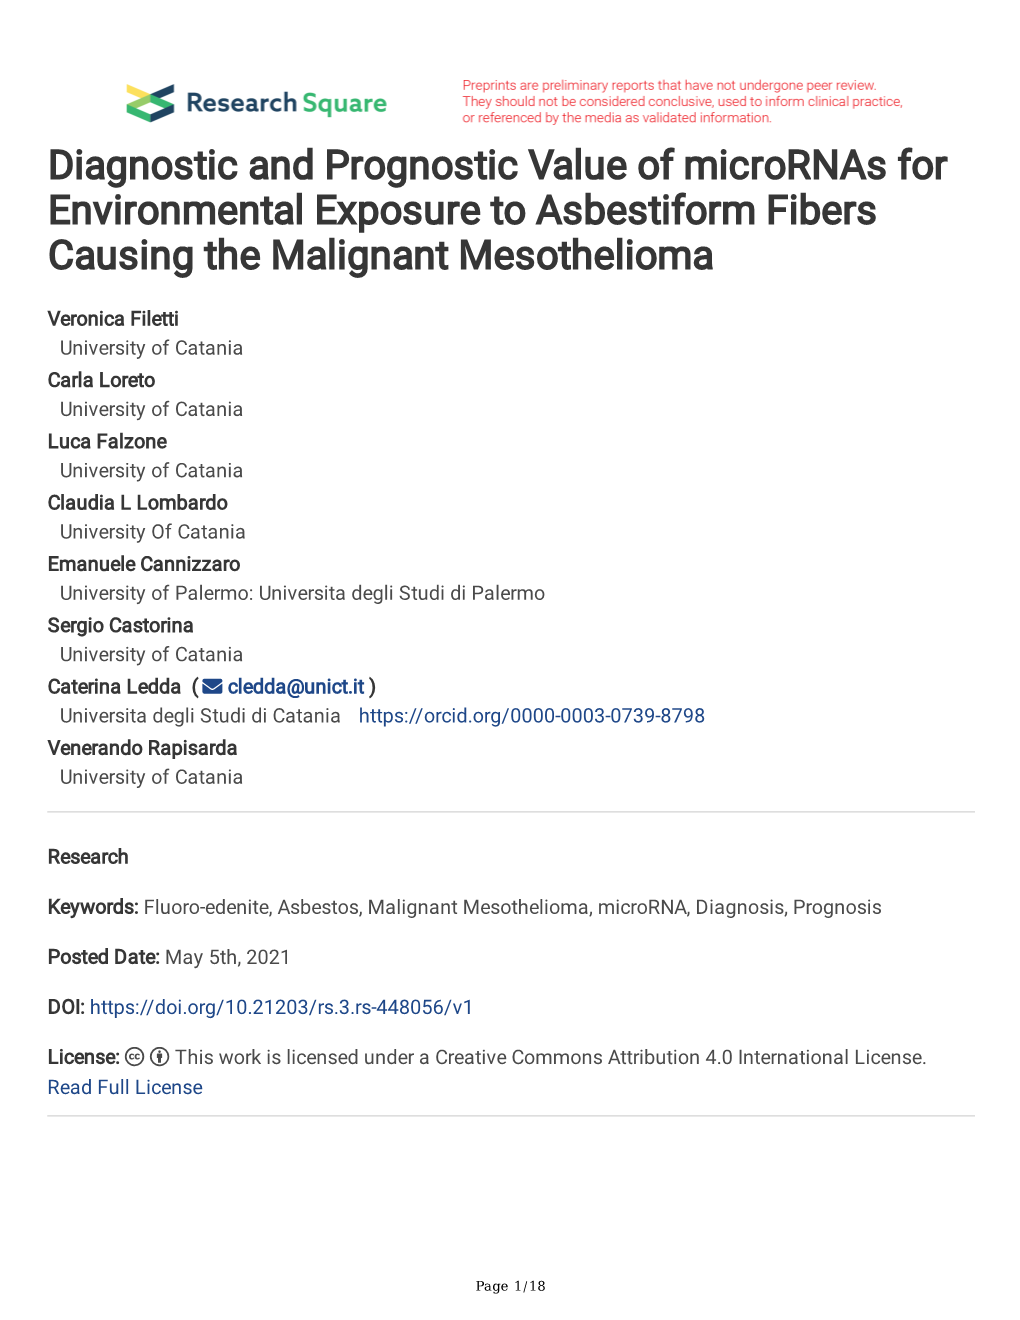 Diagnostic and Prognostic Value of Micrornas for Environmental Exposure to Asbestiform Fibers Causing the Malignant Mesothelioma